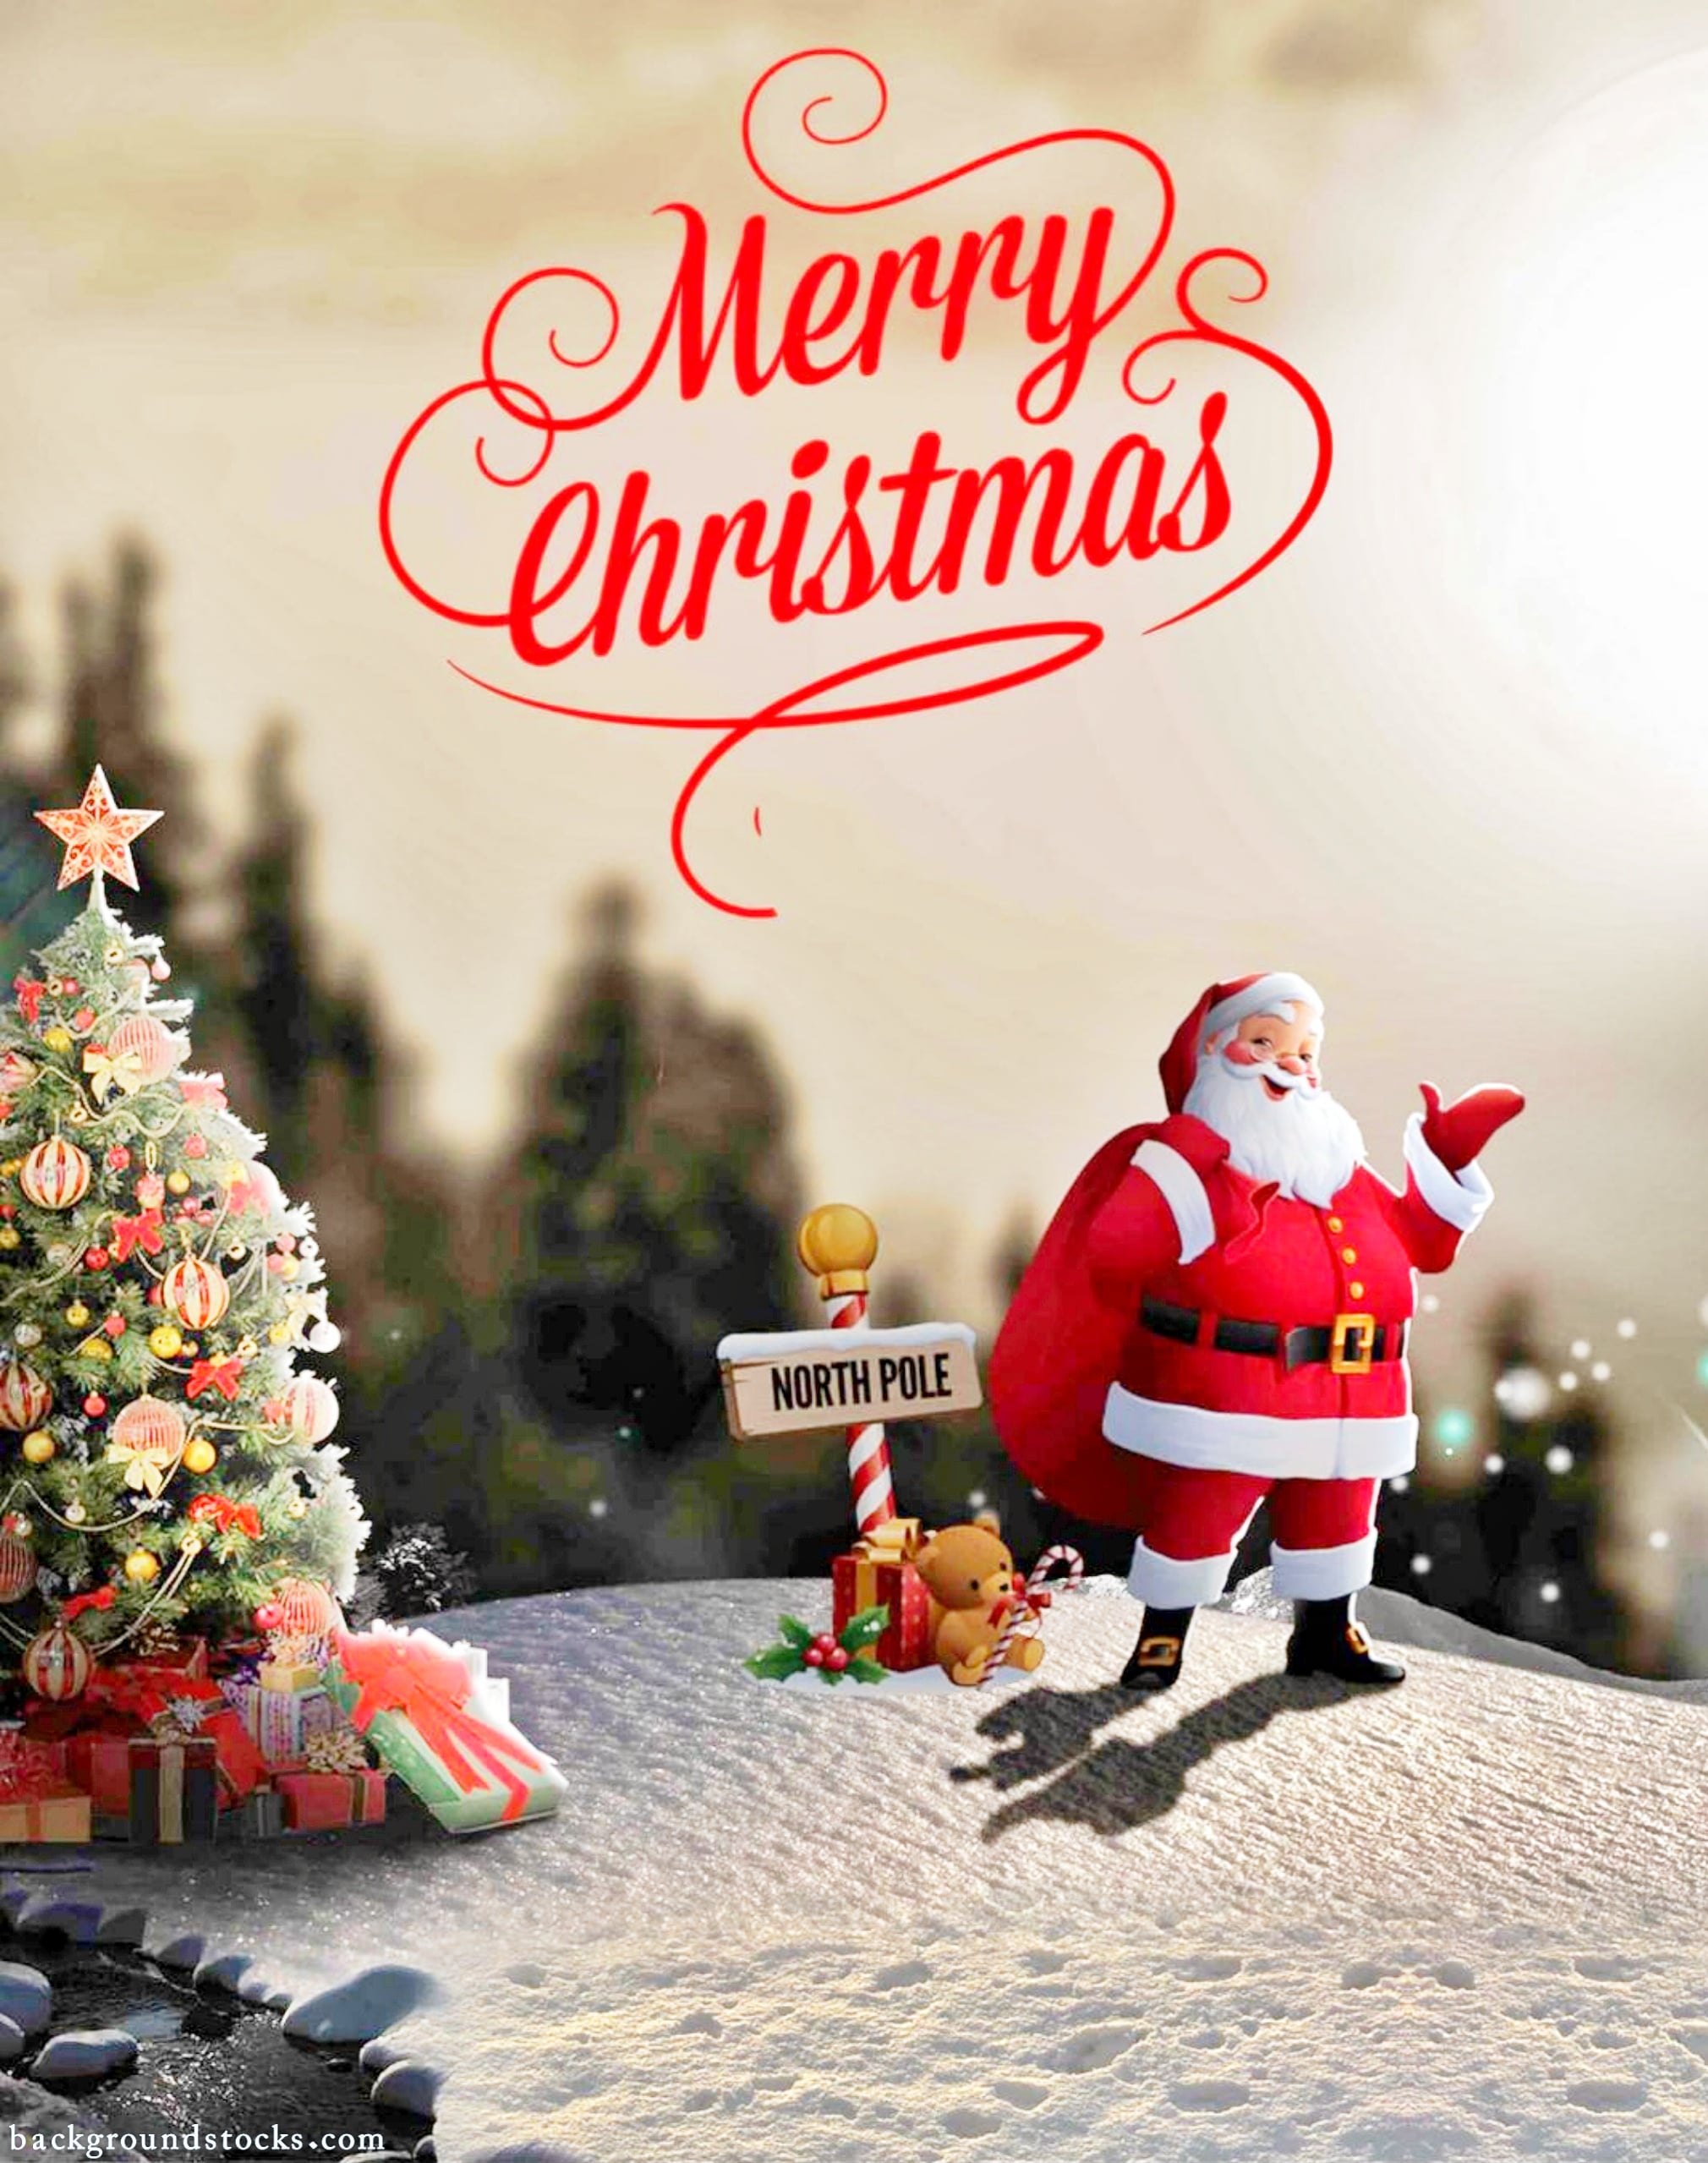 Merry Christmas Background HD 